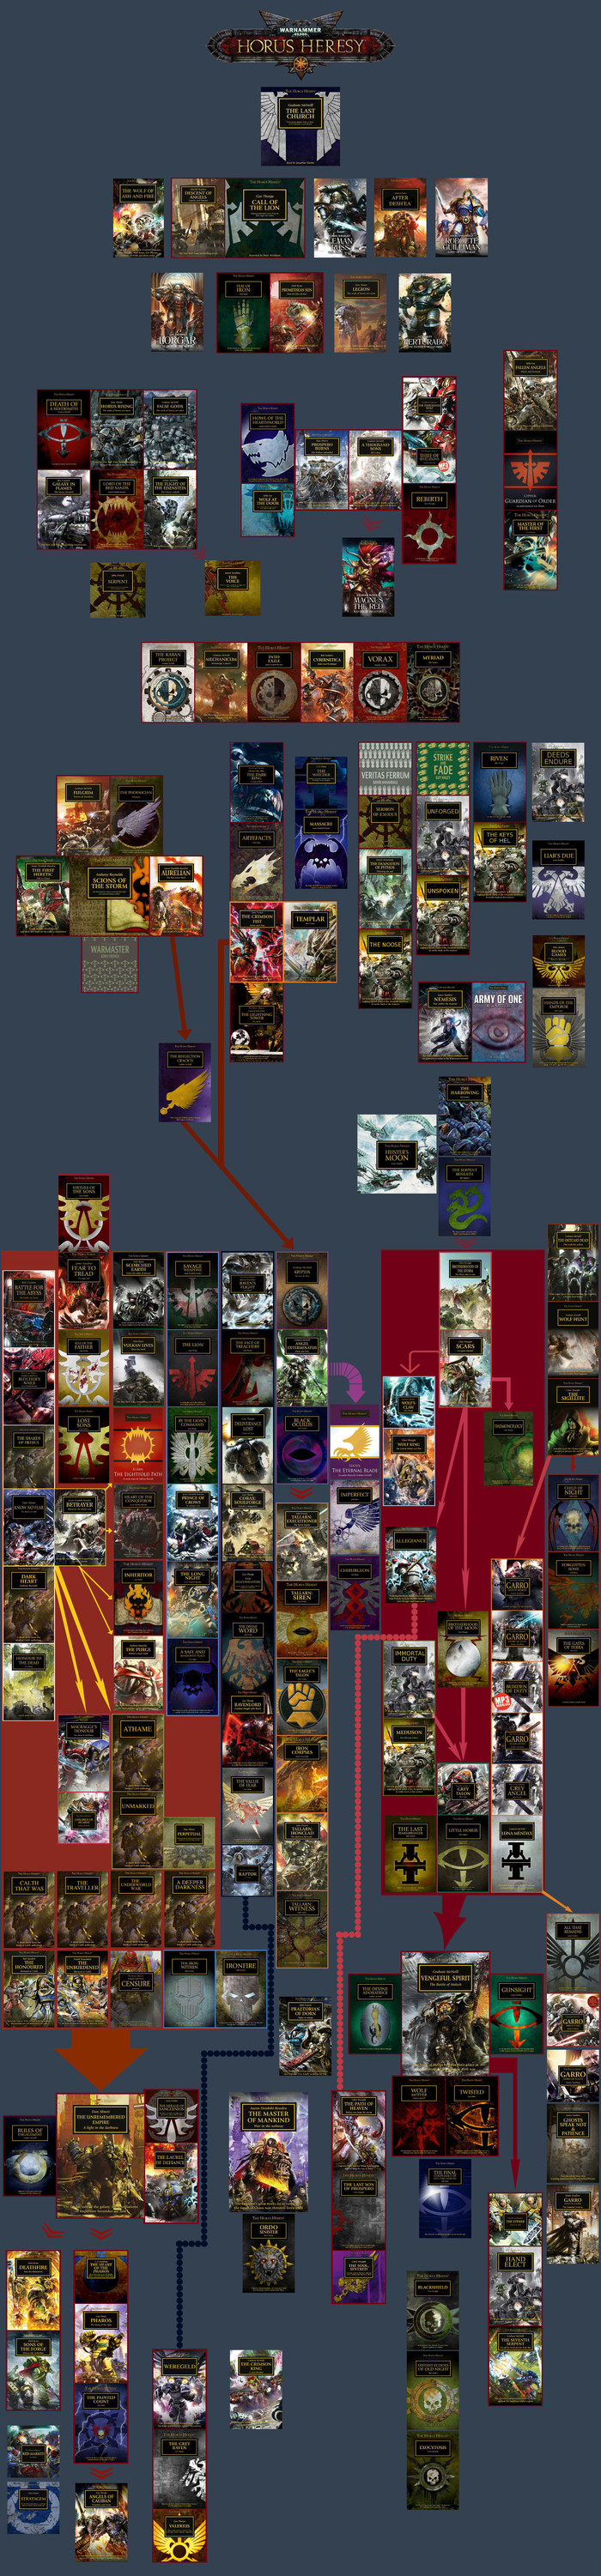 Actual Schematic of the Horus Heresy Reading Cycle - Warhammer 40k, Warhammer 30k, , Horus heresy, Longpost